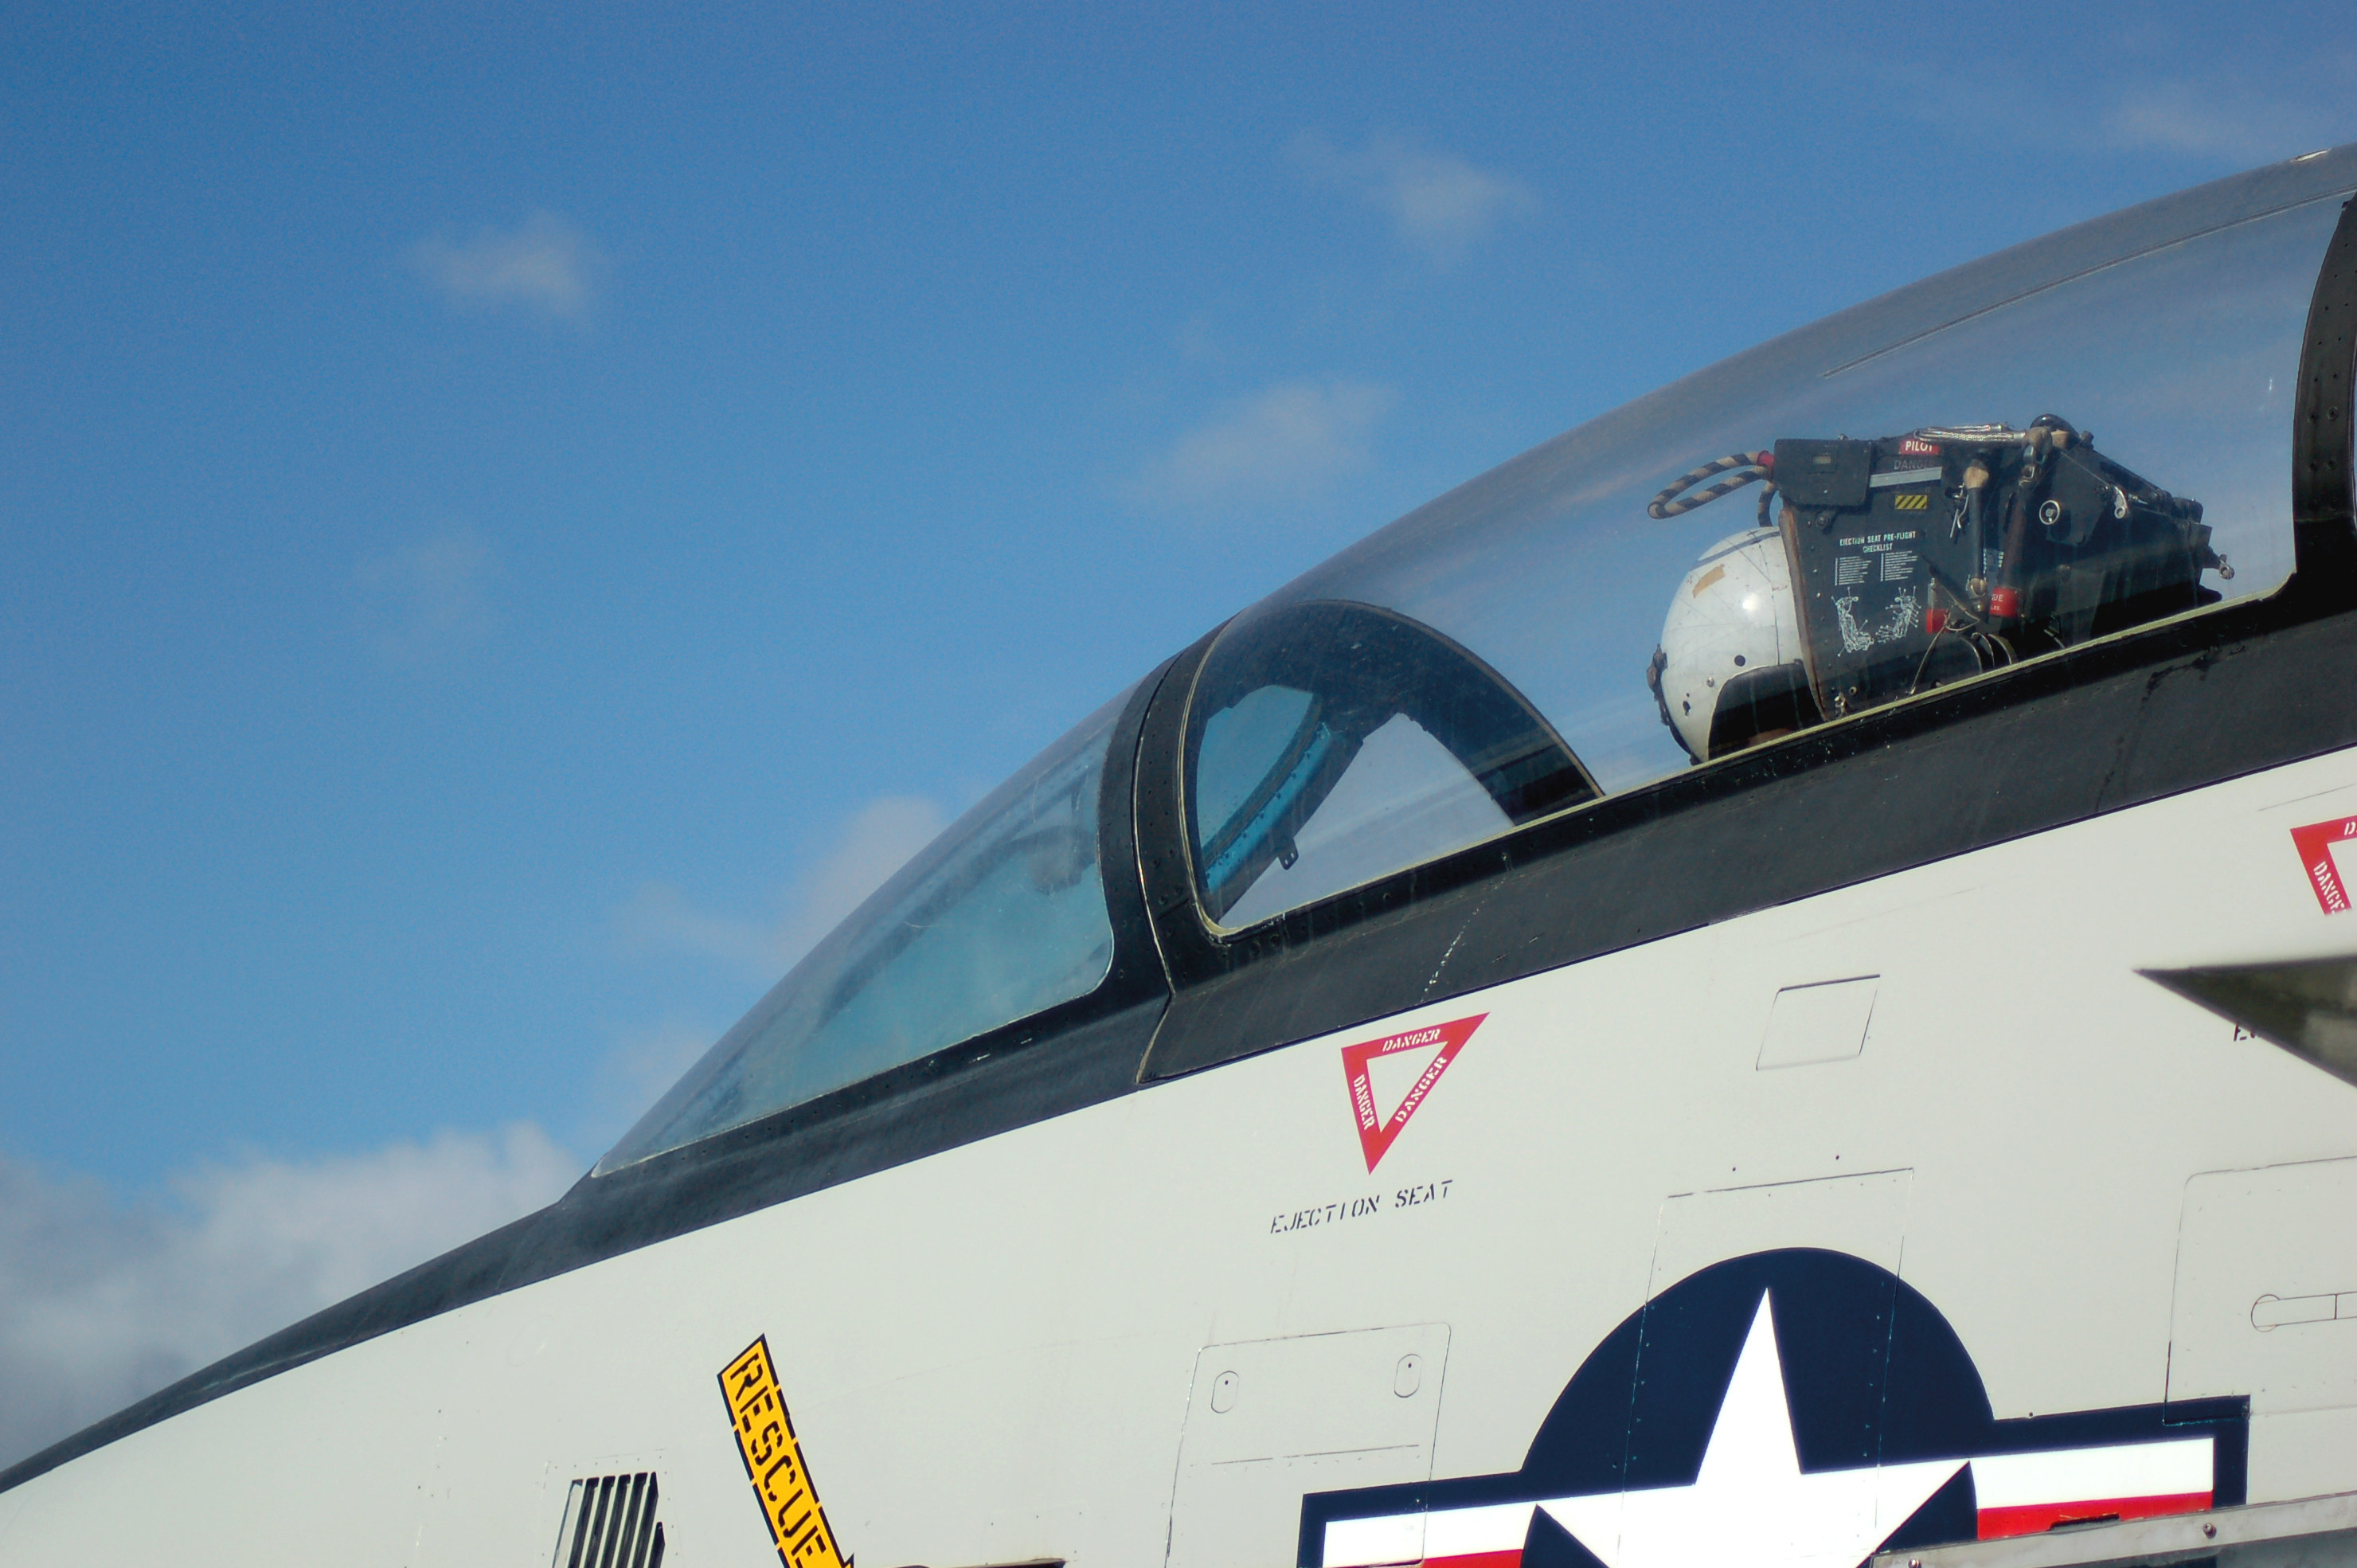 A stock image of the canopy of an F-14 plane